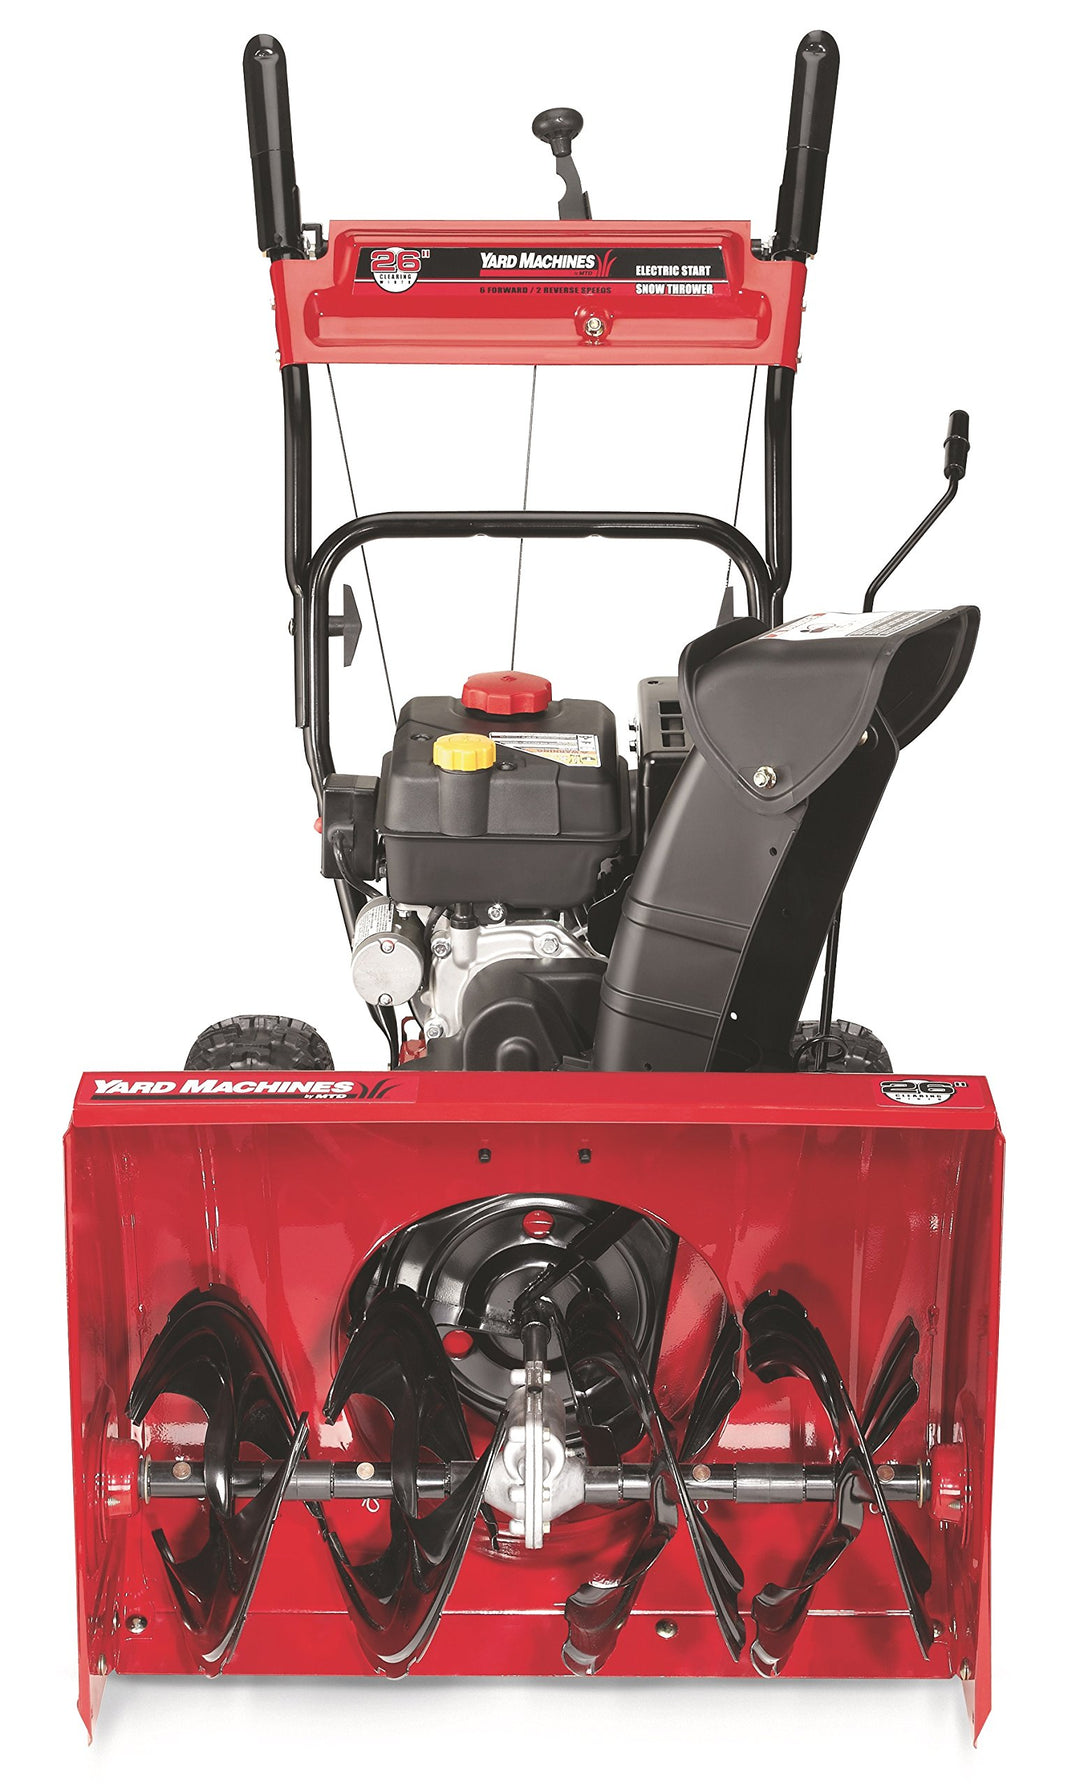 Yard Machines 600 24-in 208-cc Two-Stage Self-Propelled Gas Snow Blower with Push-Button Electric Start